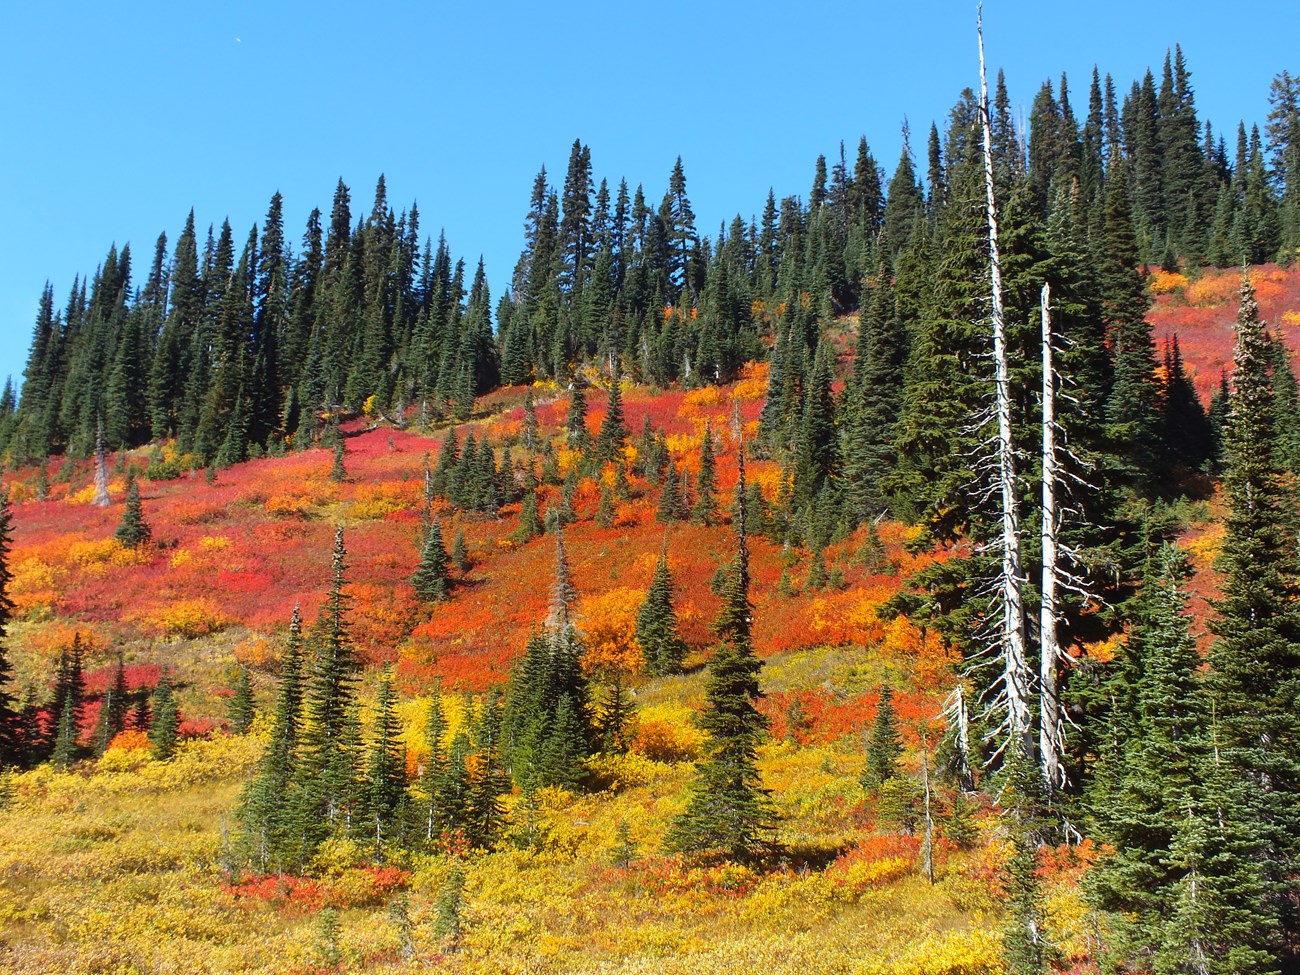 Dark green conifer trees surrounded by fall color of red, orange, and yellow bushes in subalpine meadow